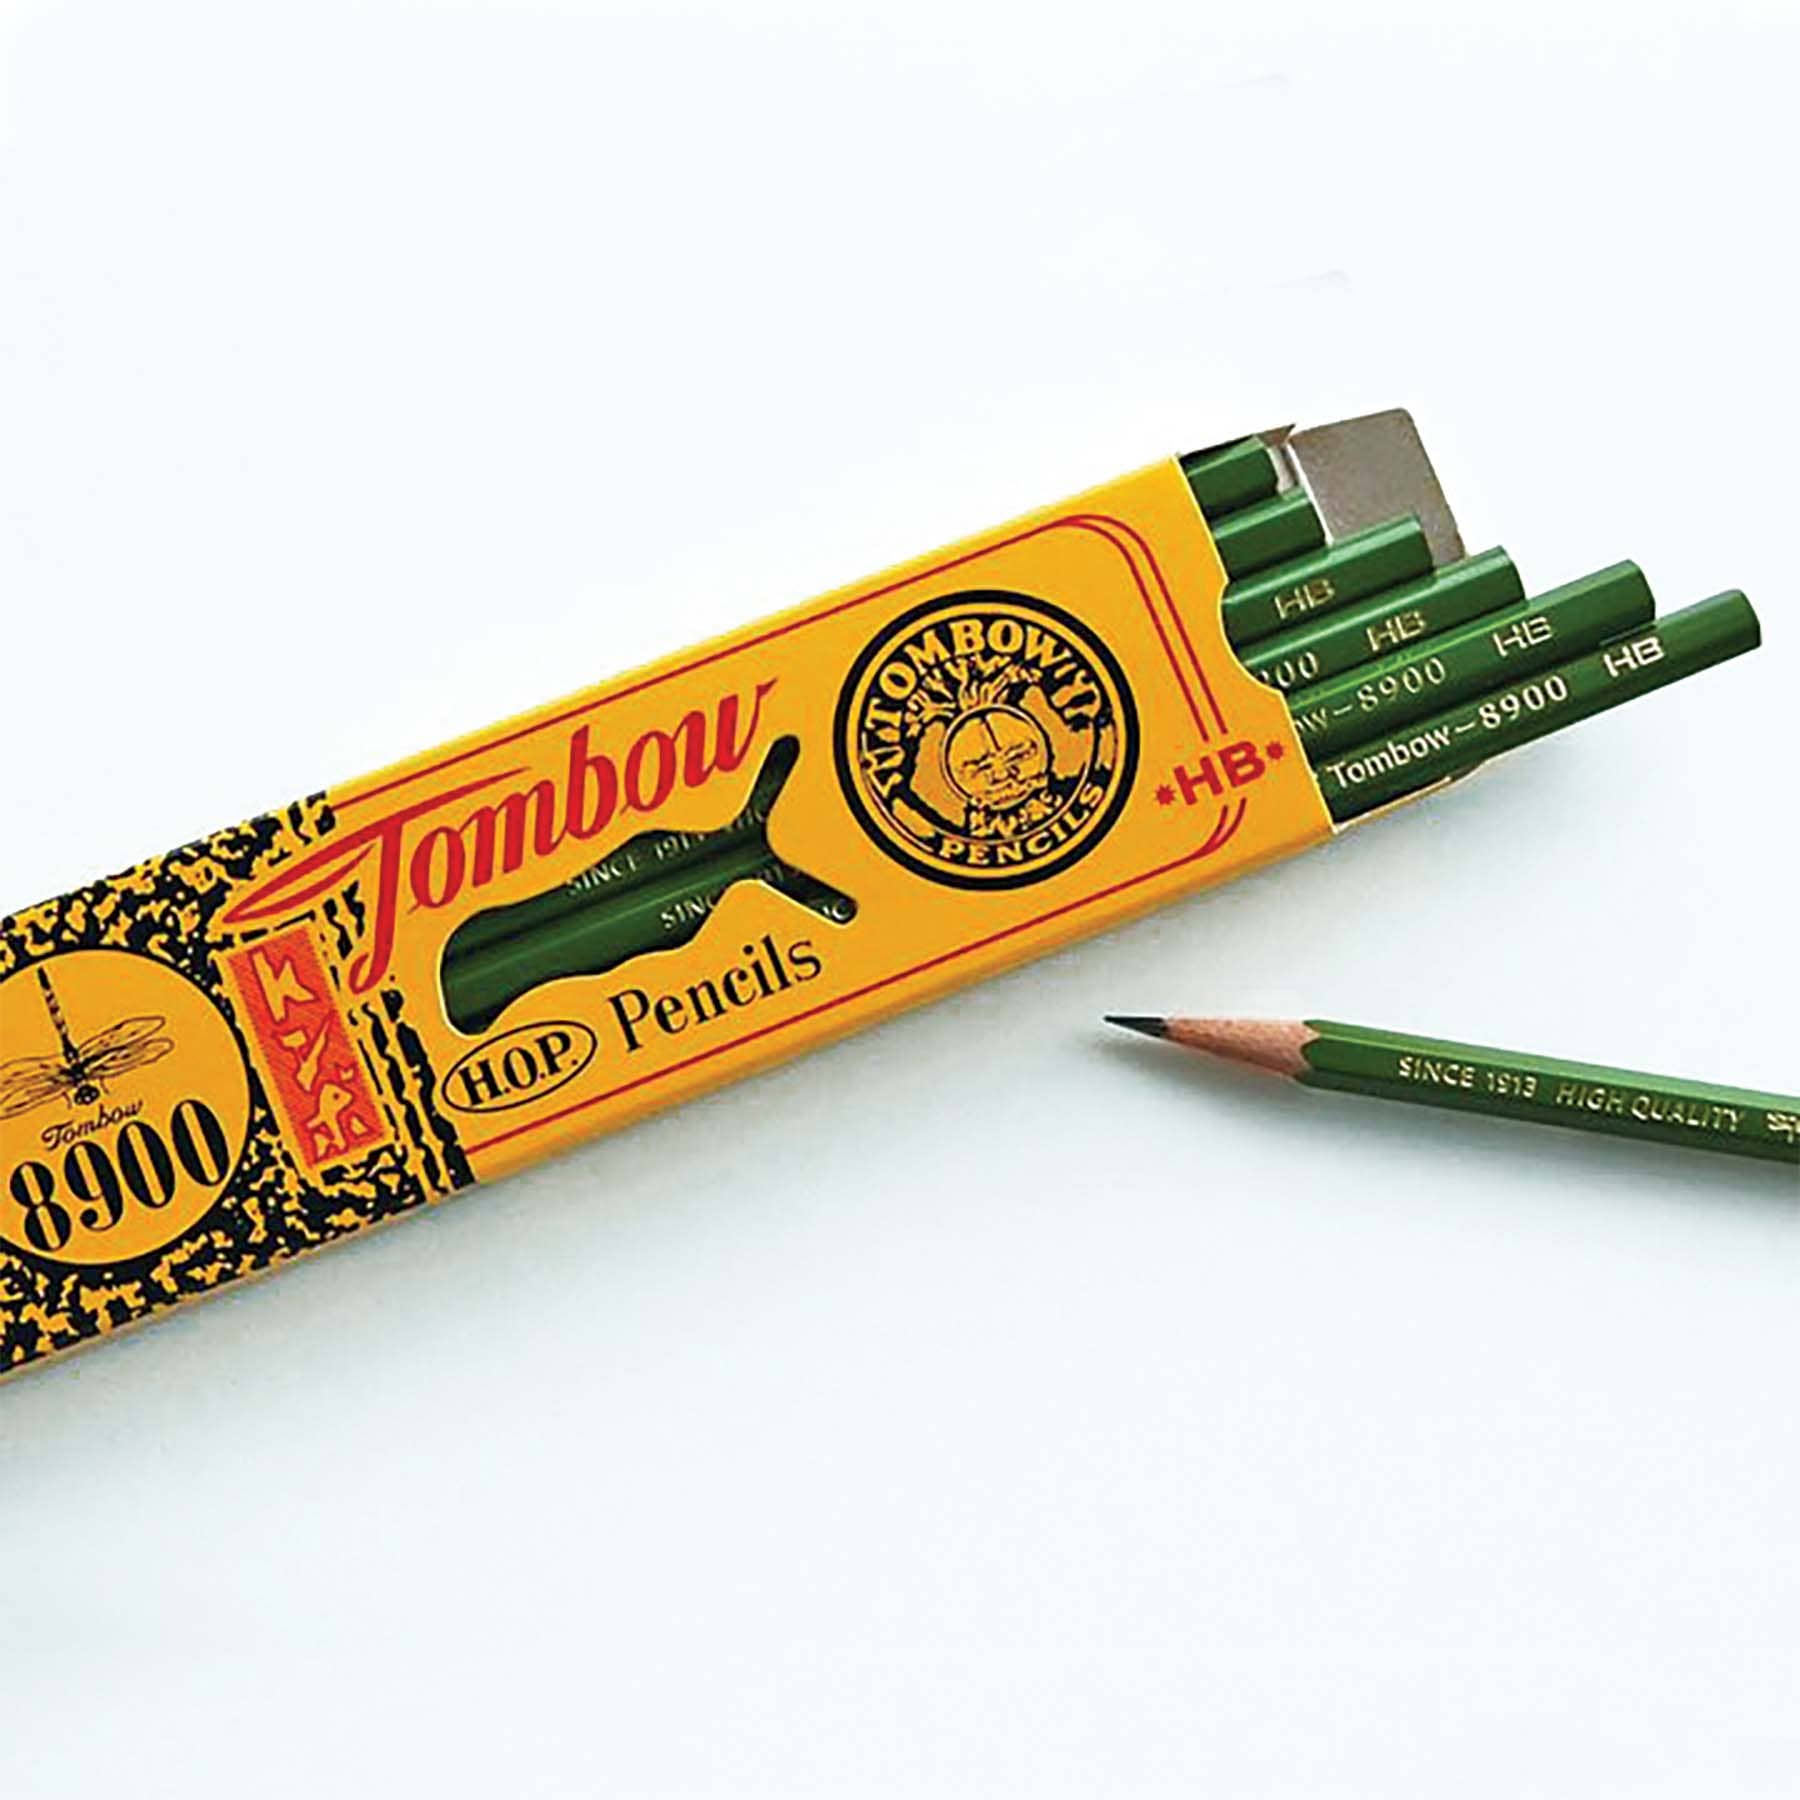 8900 Drawing Pencils - B - Space Camp